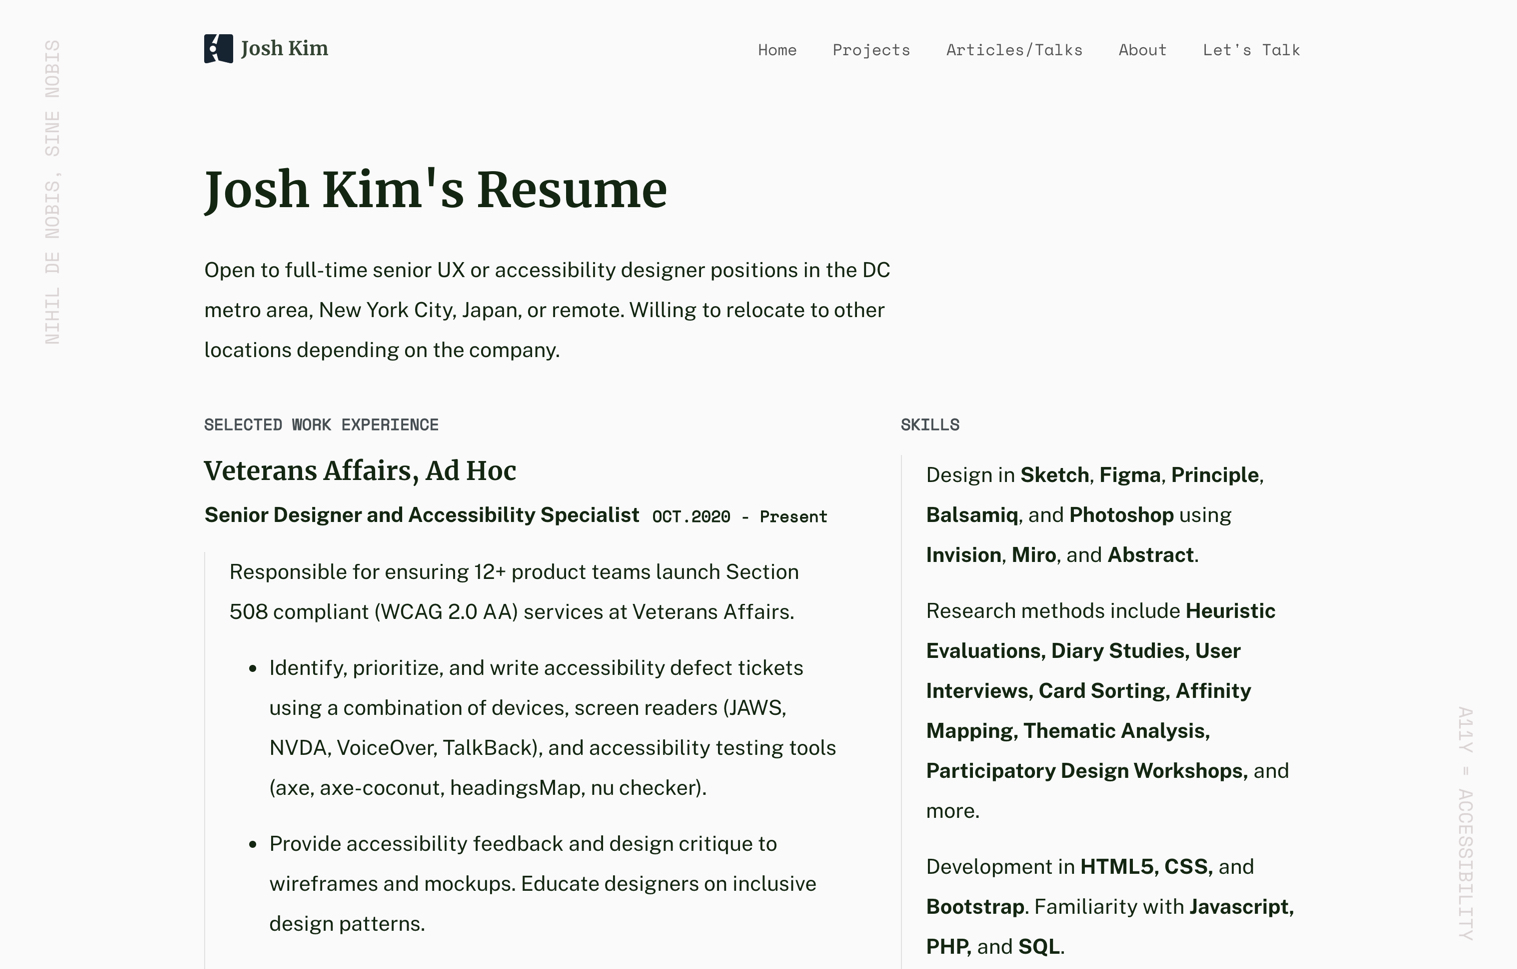 A responsive web version of my resume with structured headings.